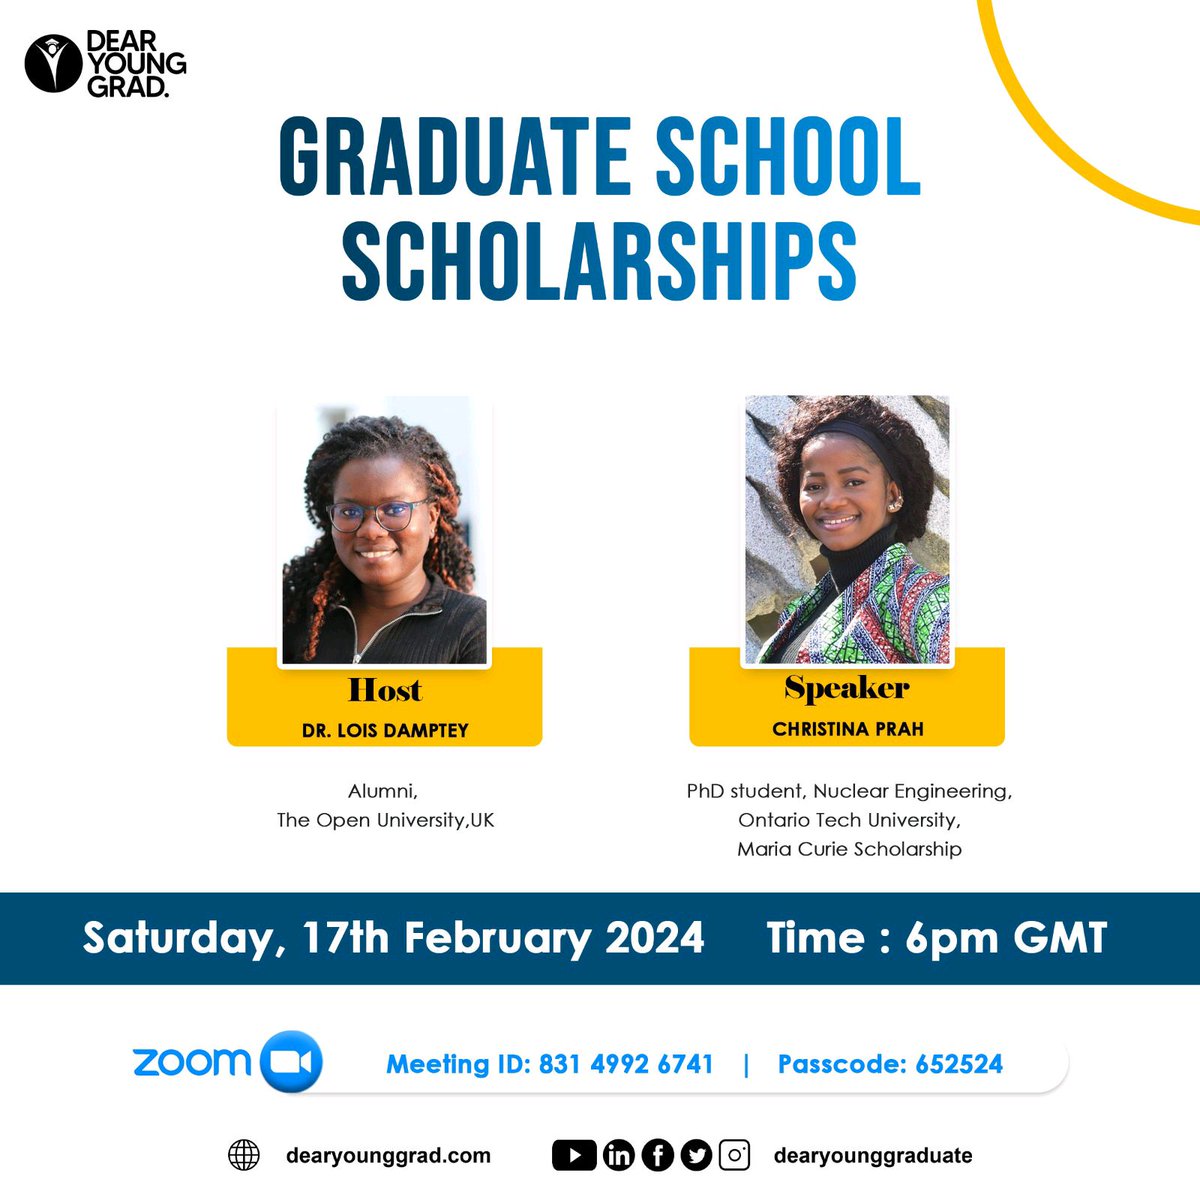 Accessing graduate scholarships has never been easy. It takes efforts, resilience and the right information. There are millions of scholarship opportunities available to aid you in your graduate studies and we want introduce you to some of these scholarships.